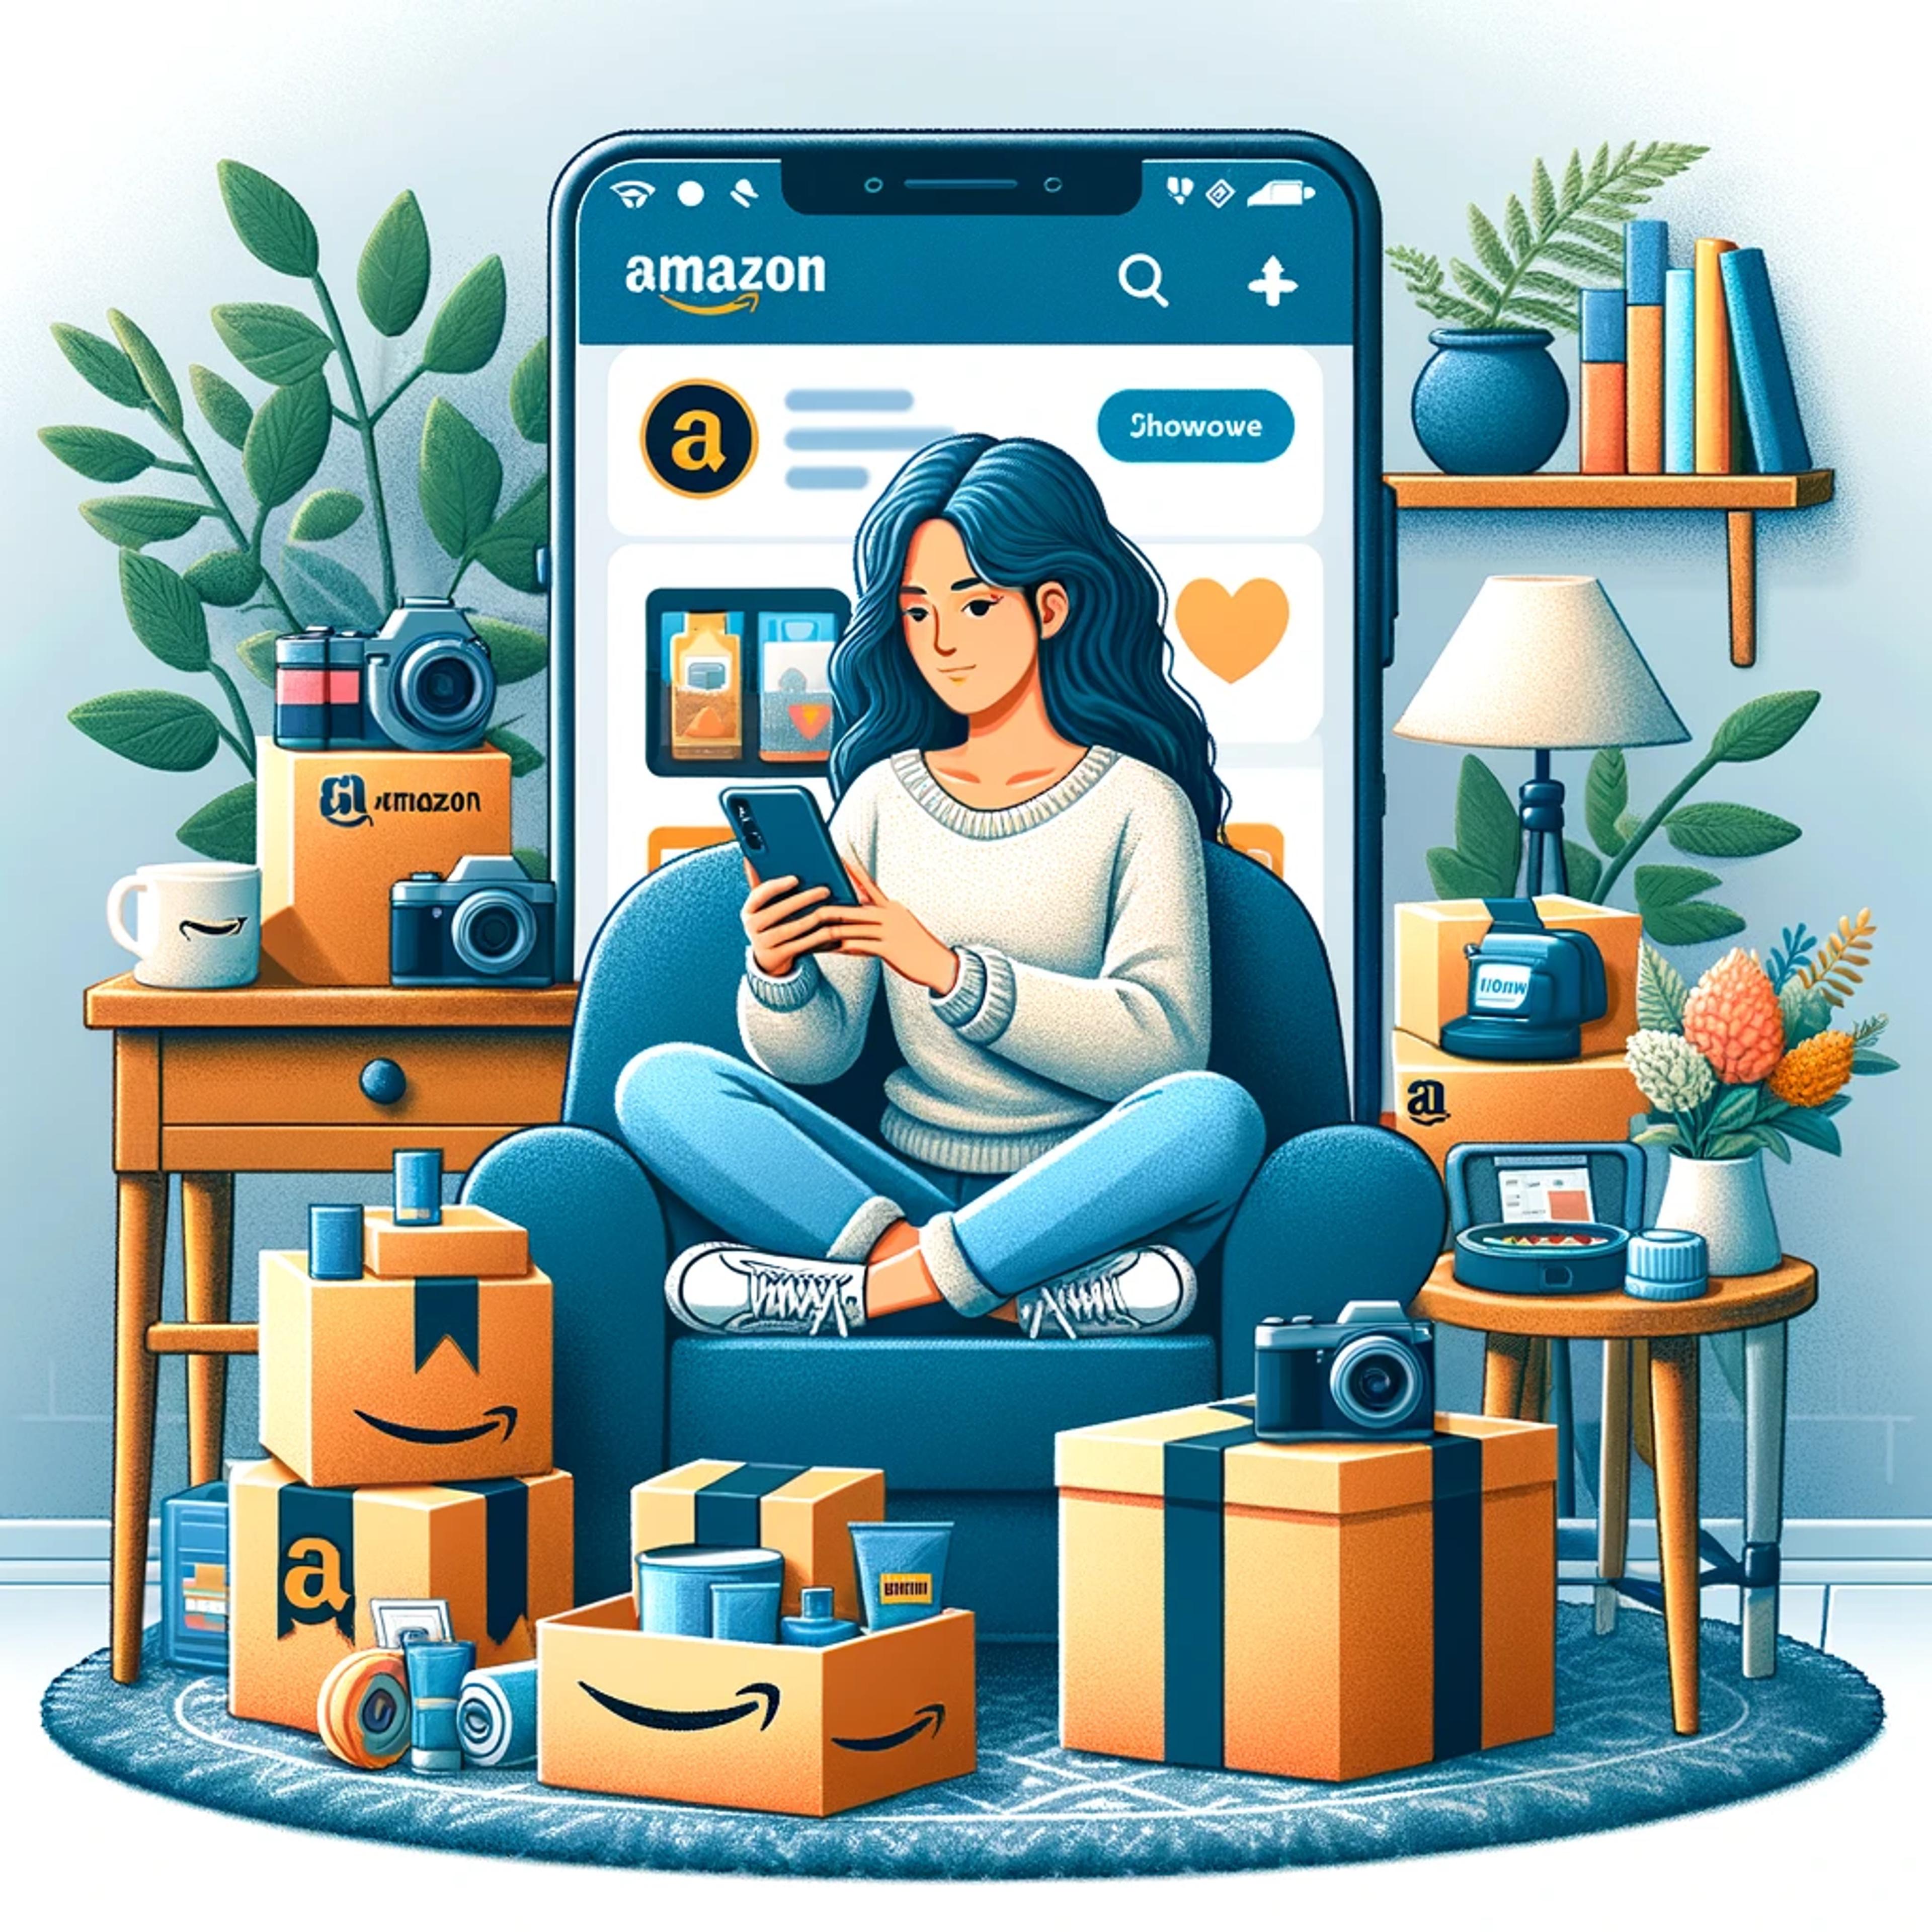 Illustration of a social media influencer promoting Amazon products on Instagram.